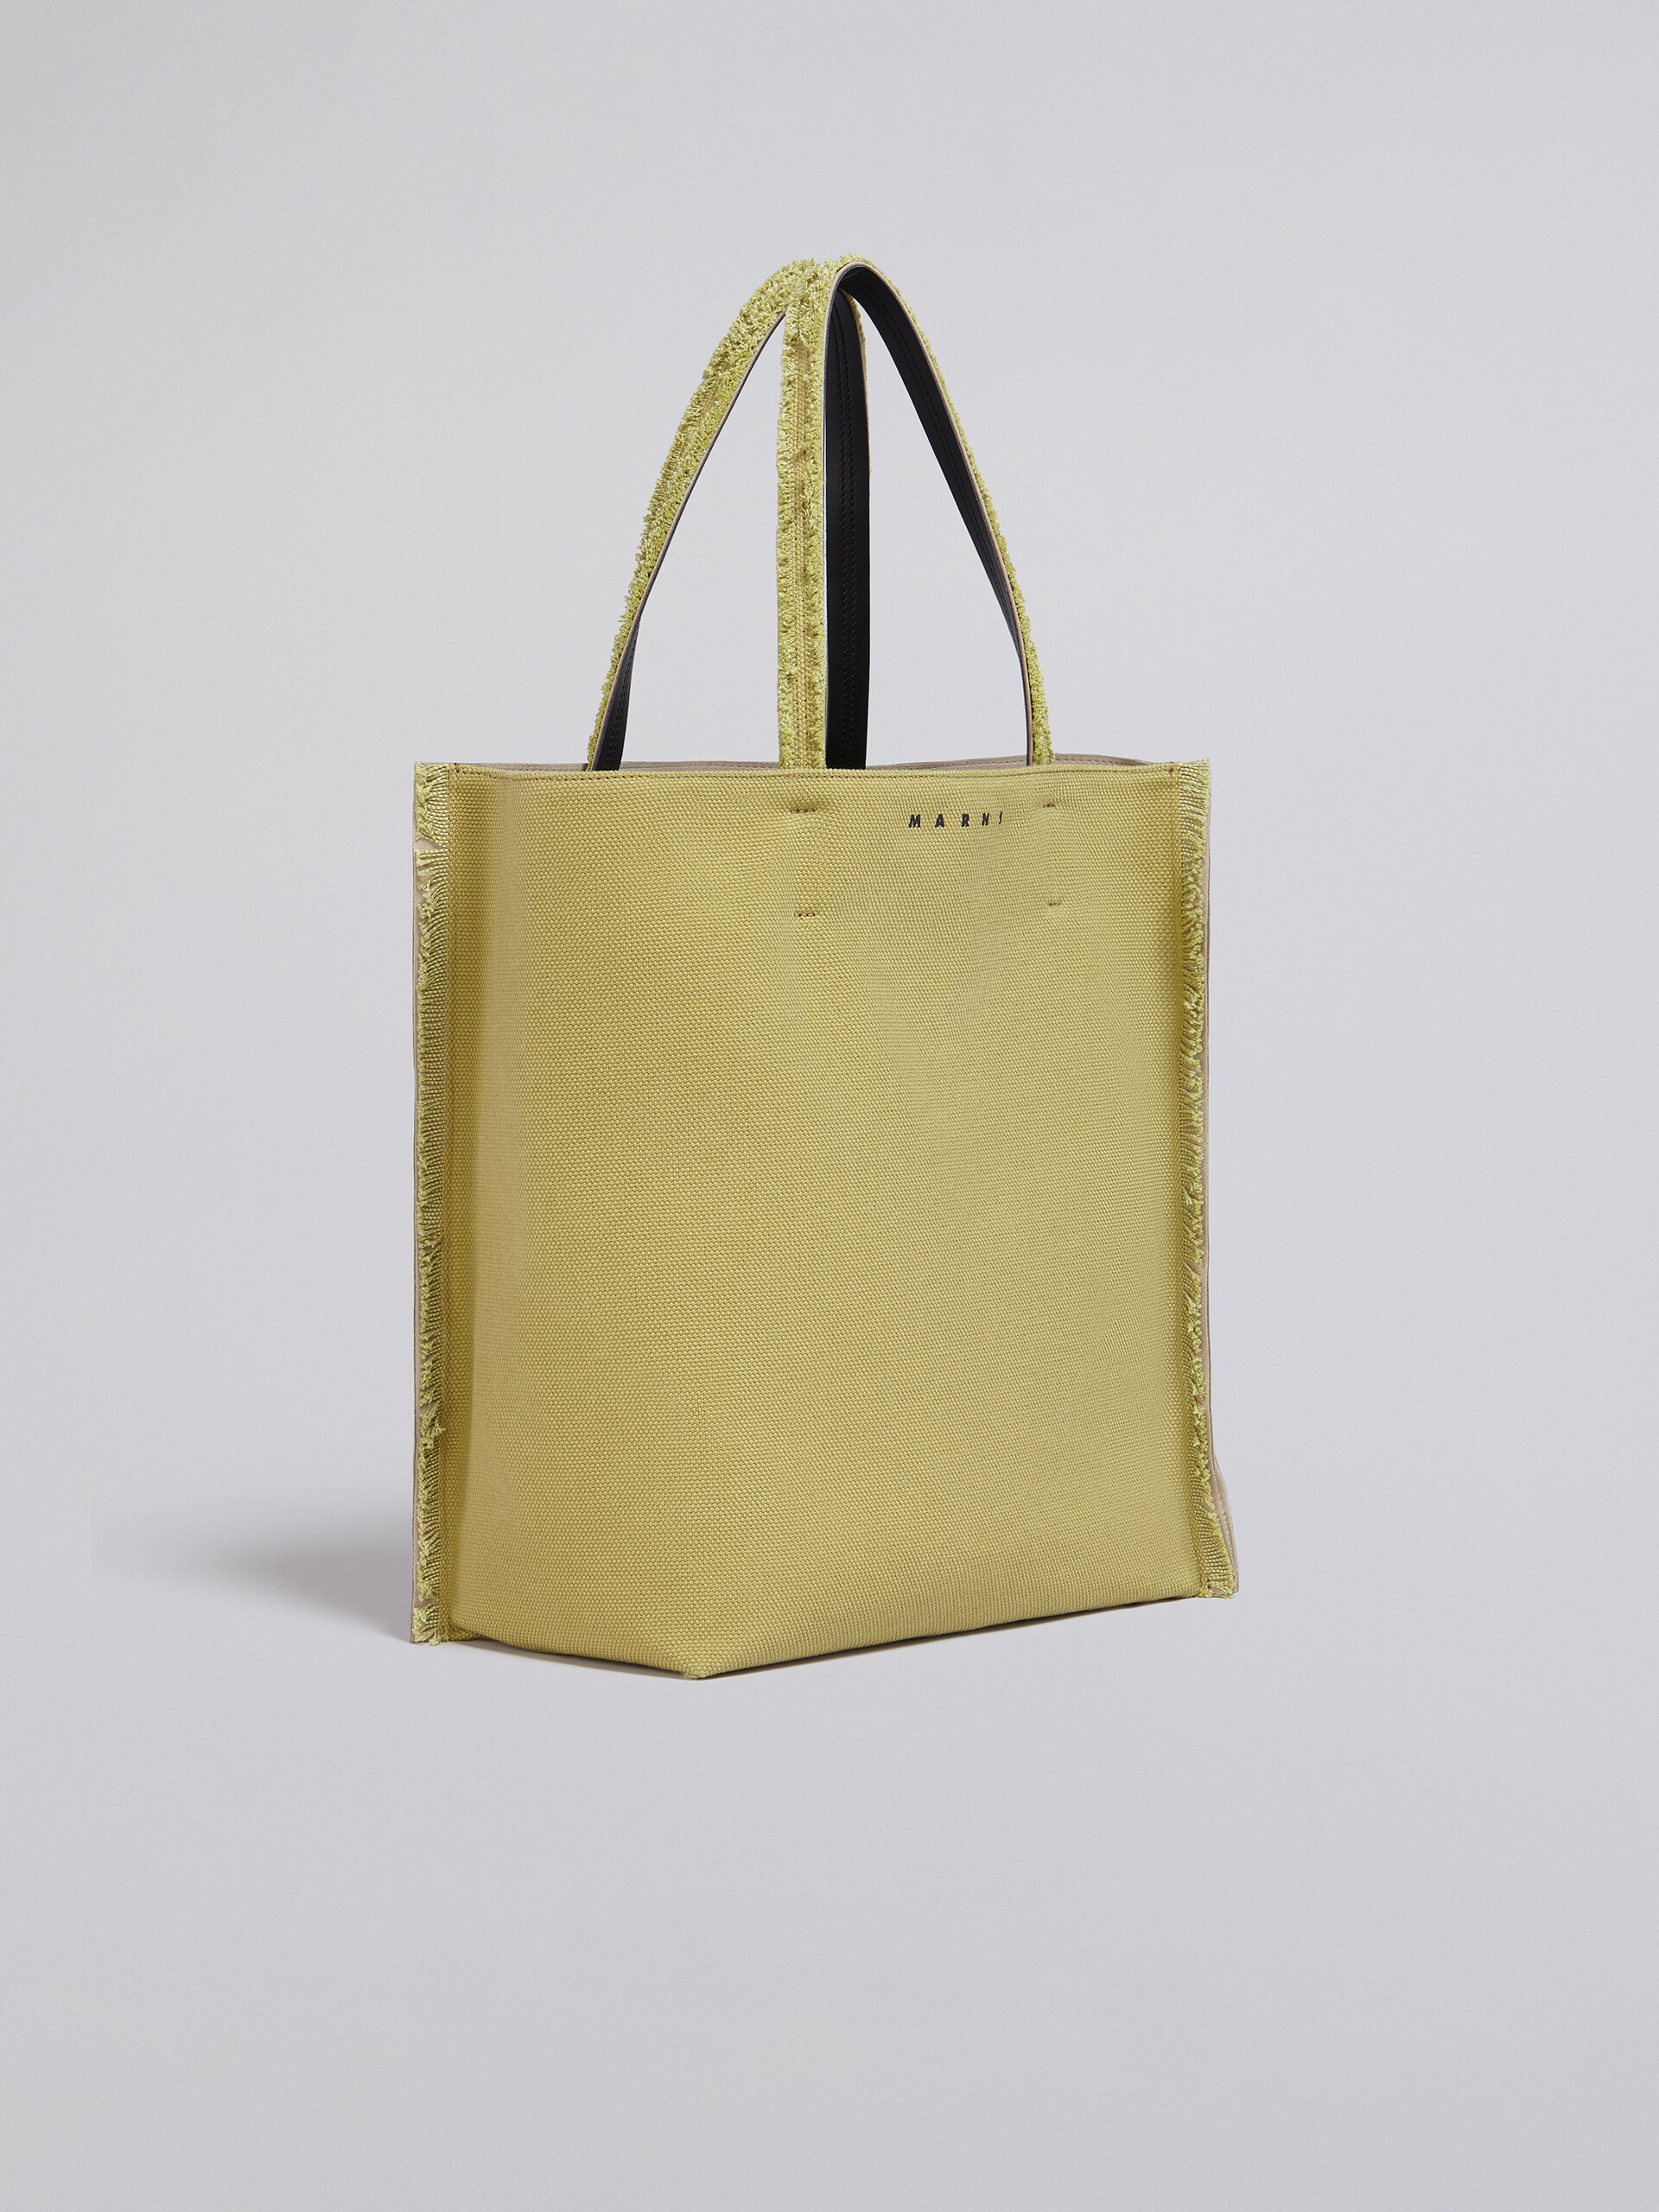 MUSEO SOFT large bag in green leather and canvas - Shopping Bags - Image 6